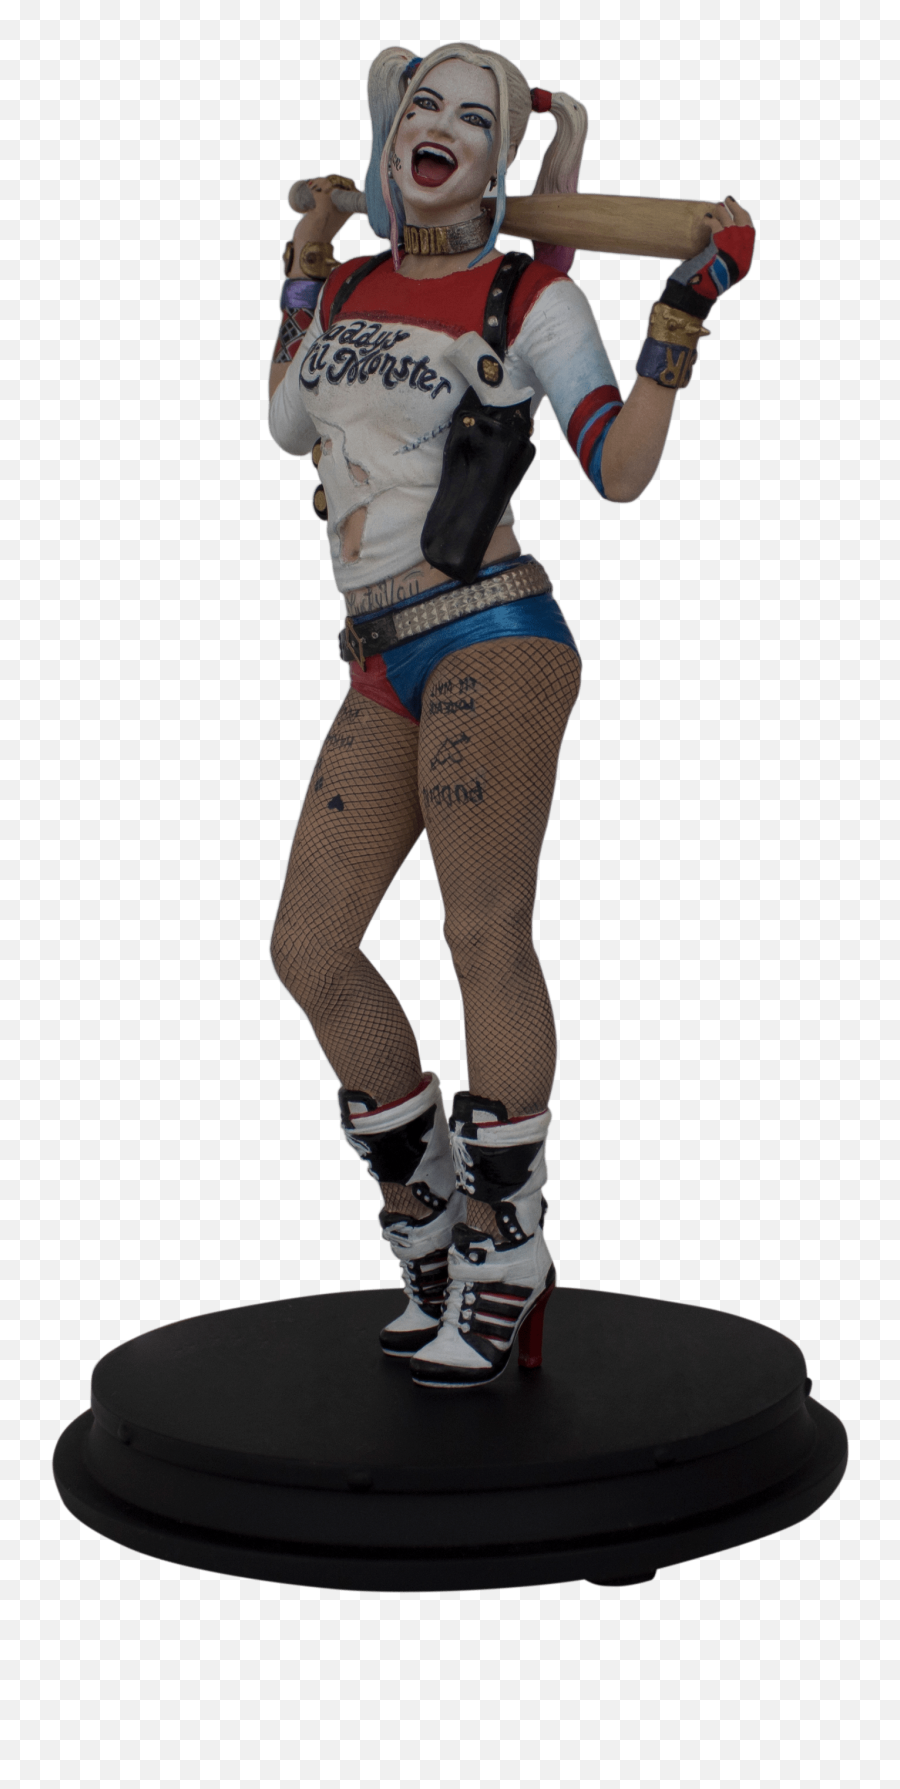 Action Figure Insider Karate Kid - Statuette Figurine Harley Quinn Png,Dc Icon Harley Statue